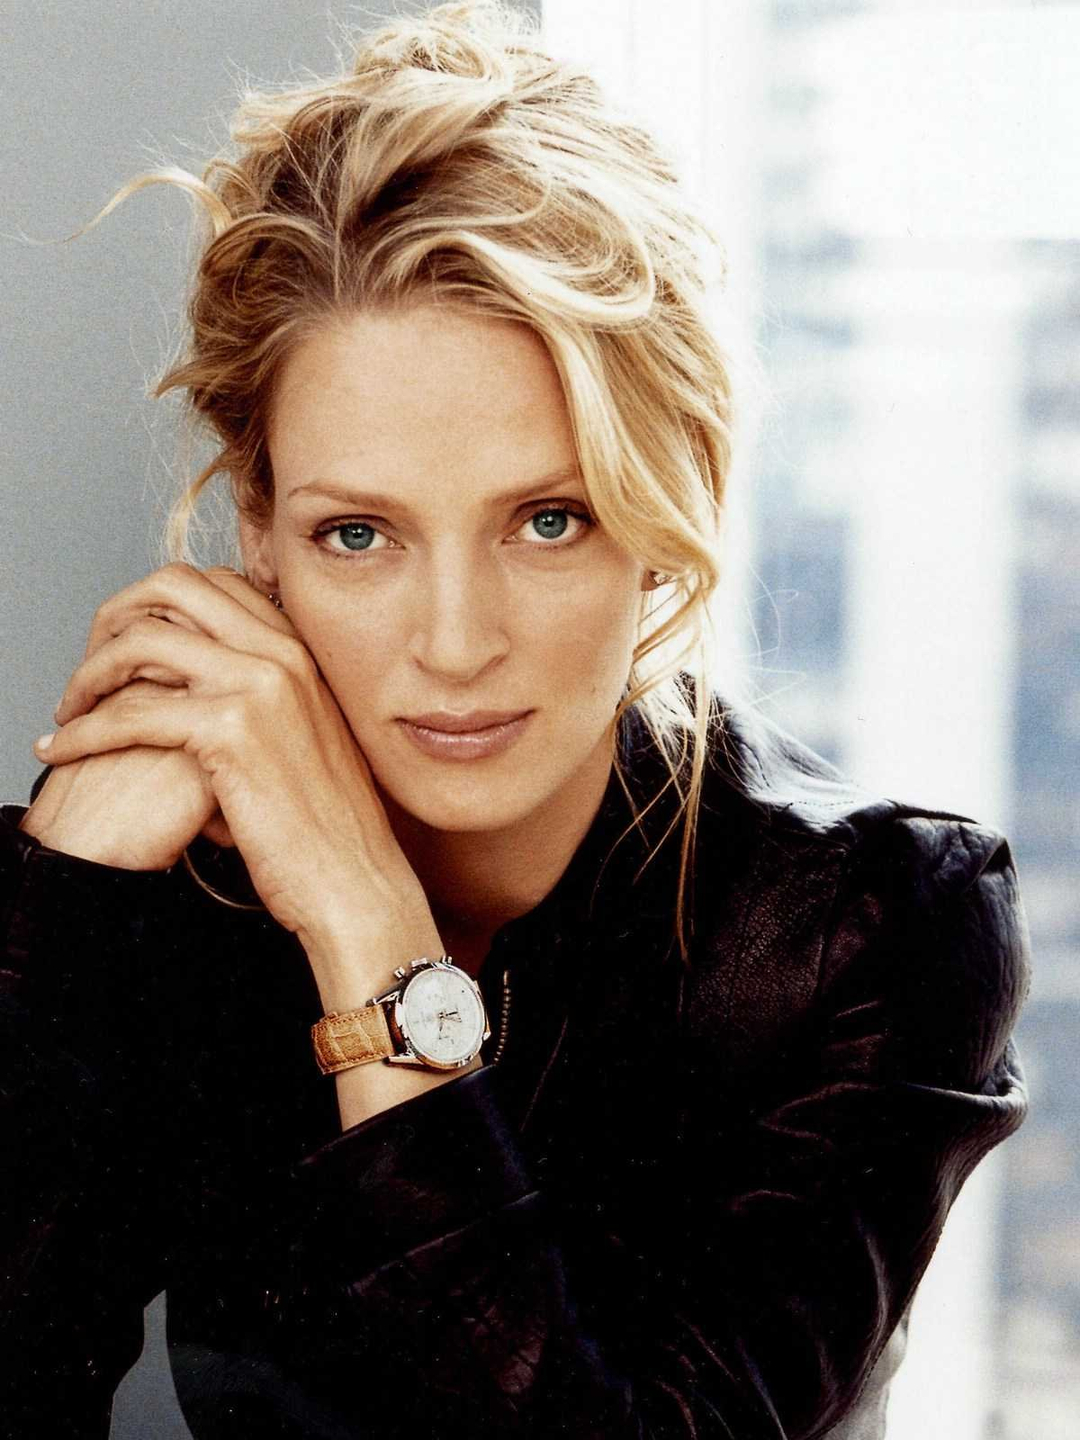 Uma Thurman in her youth